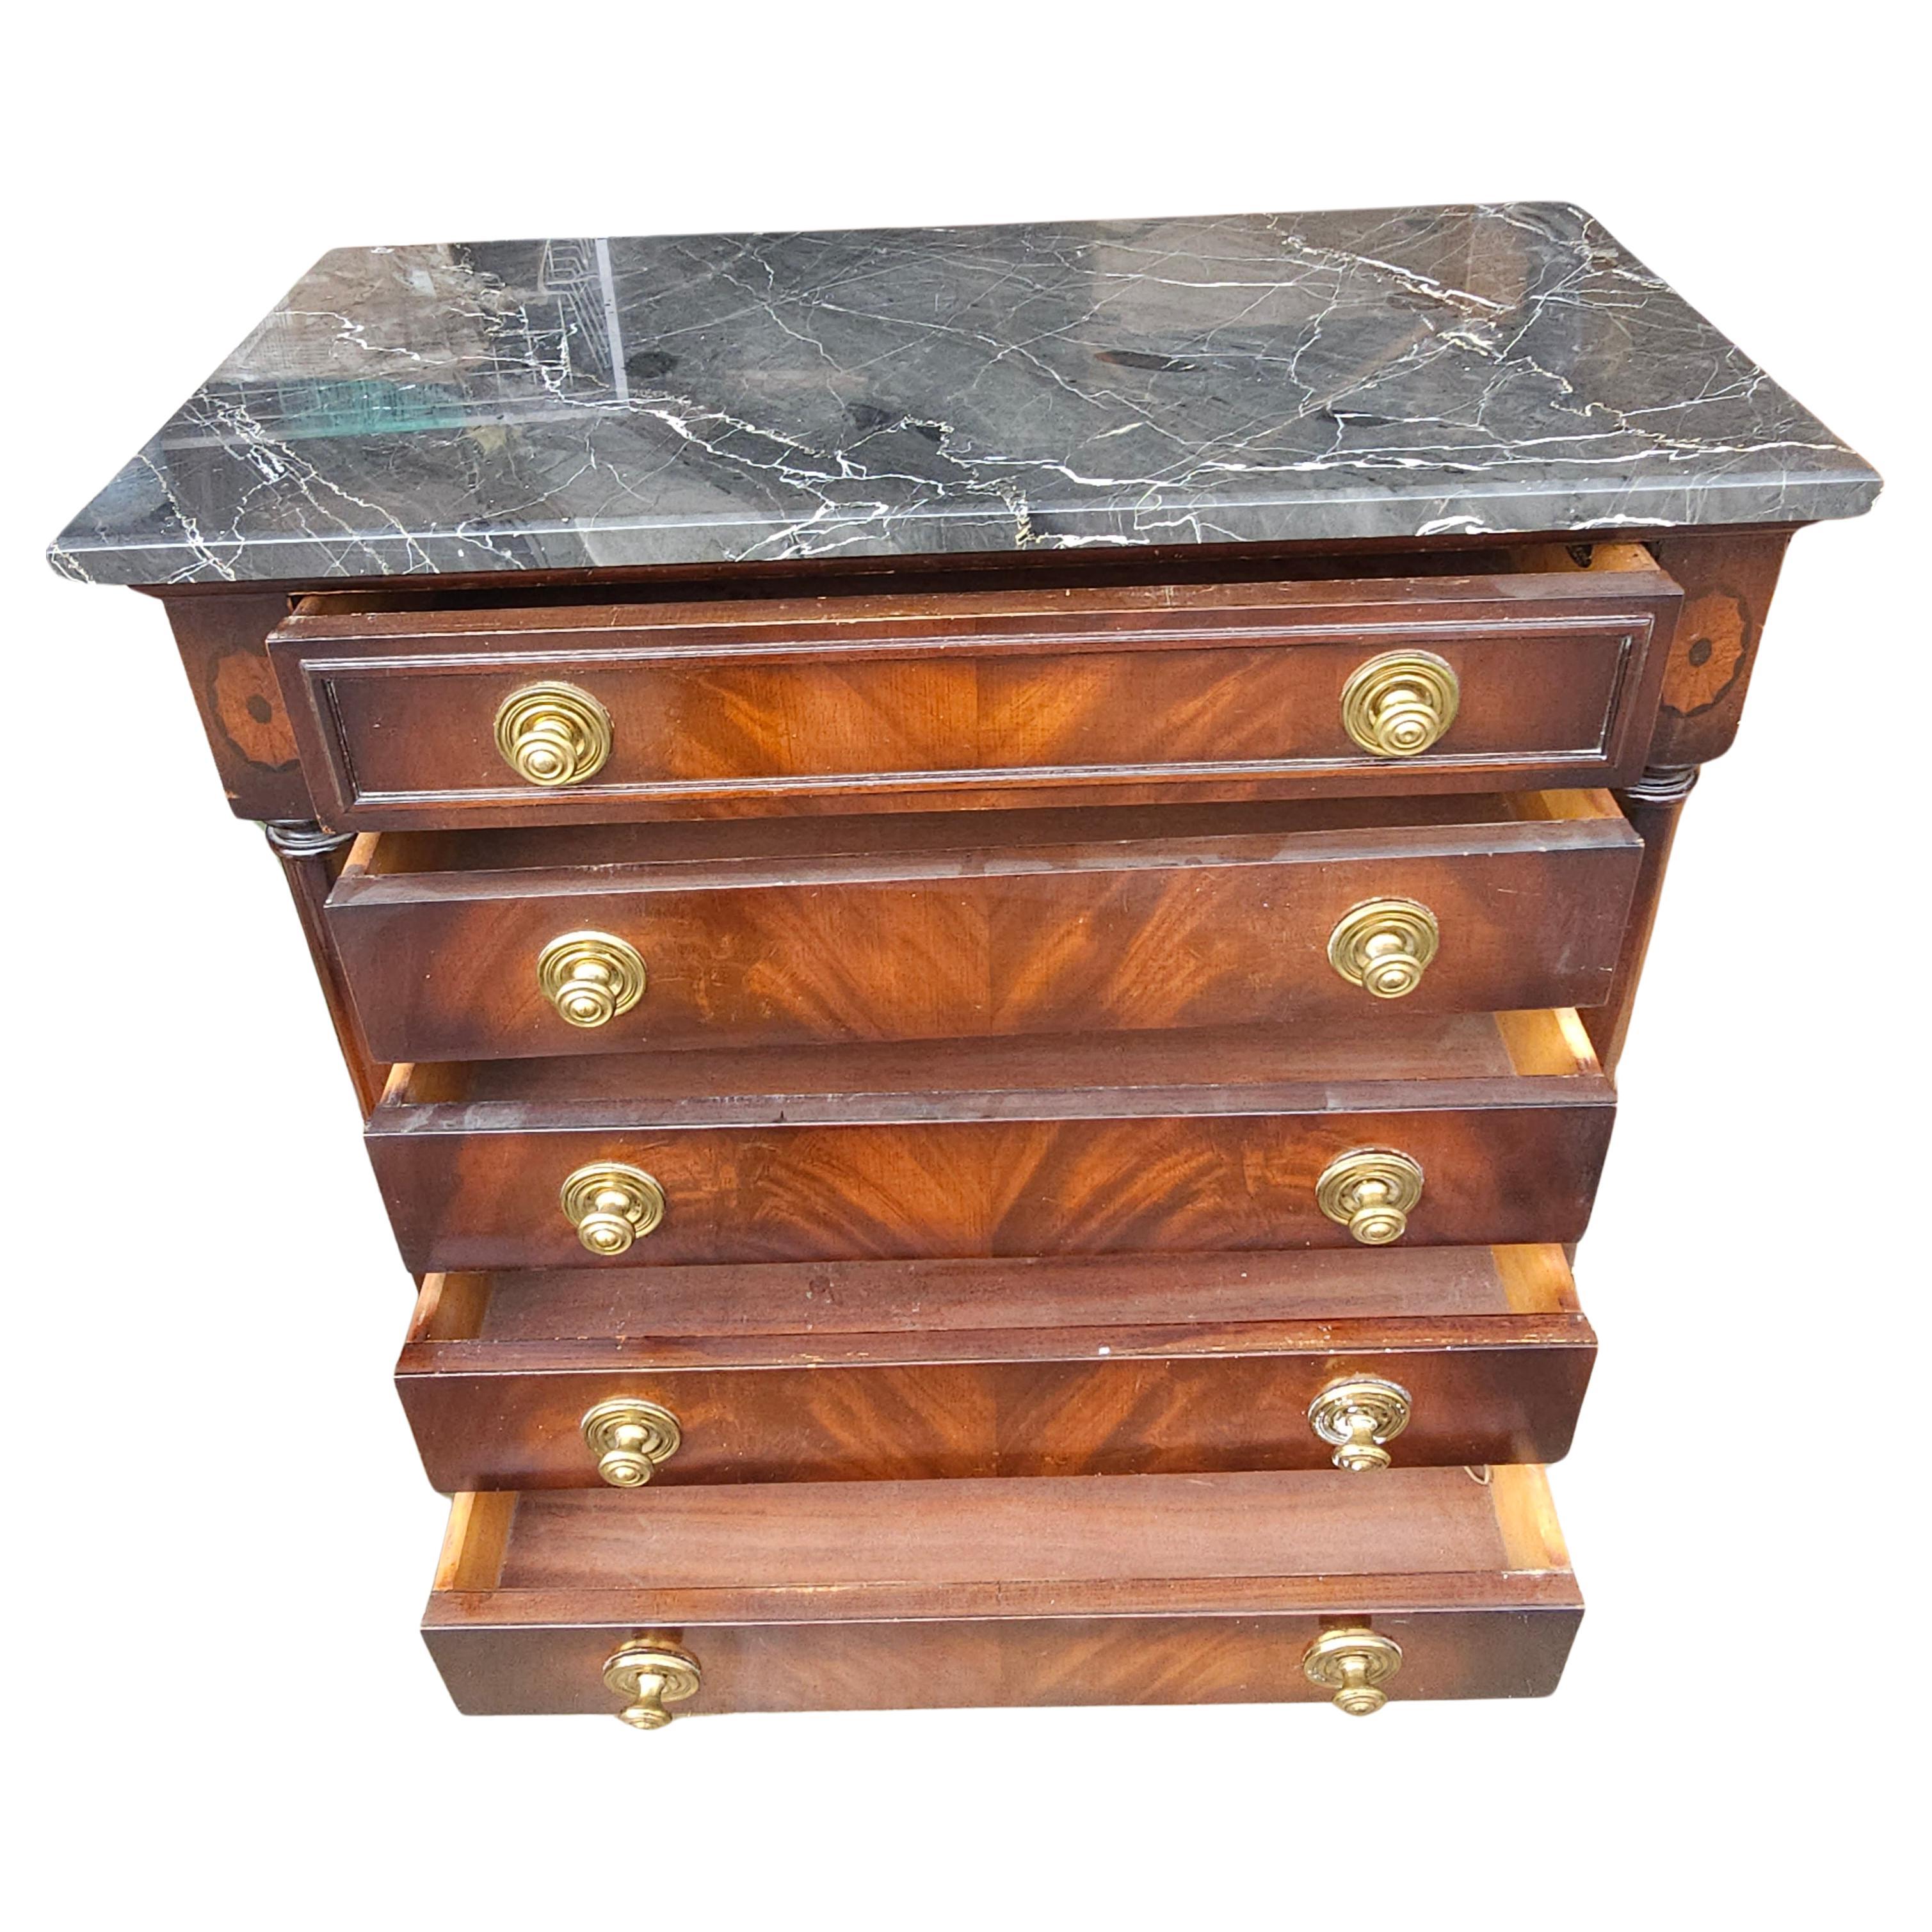 20th Century Colony House Furniture American Empire Style Mahogany Chest of Drawers with Marble Top. Dovetail Drawers operating flawlessly. Very good vintage condition. Measures 30